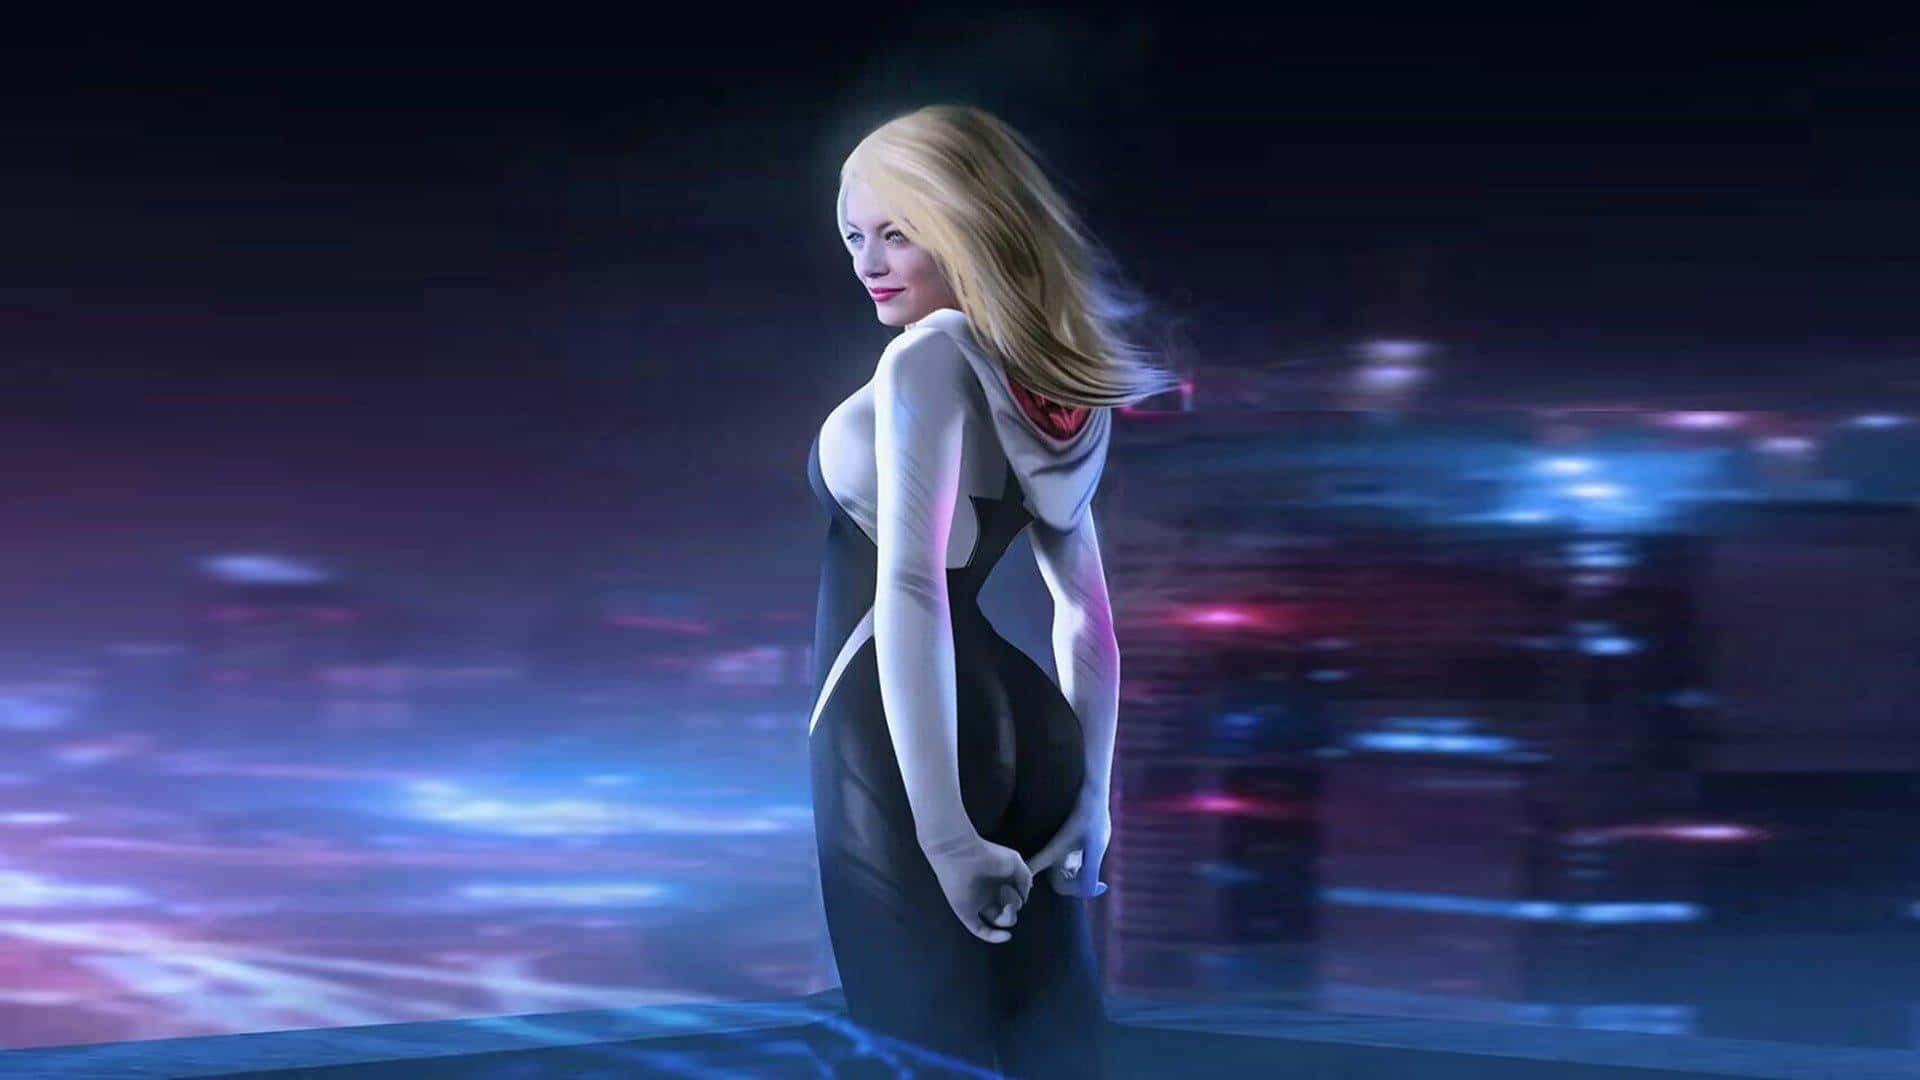 Spider Gwen takes on her enemies with agility and strength